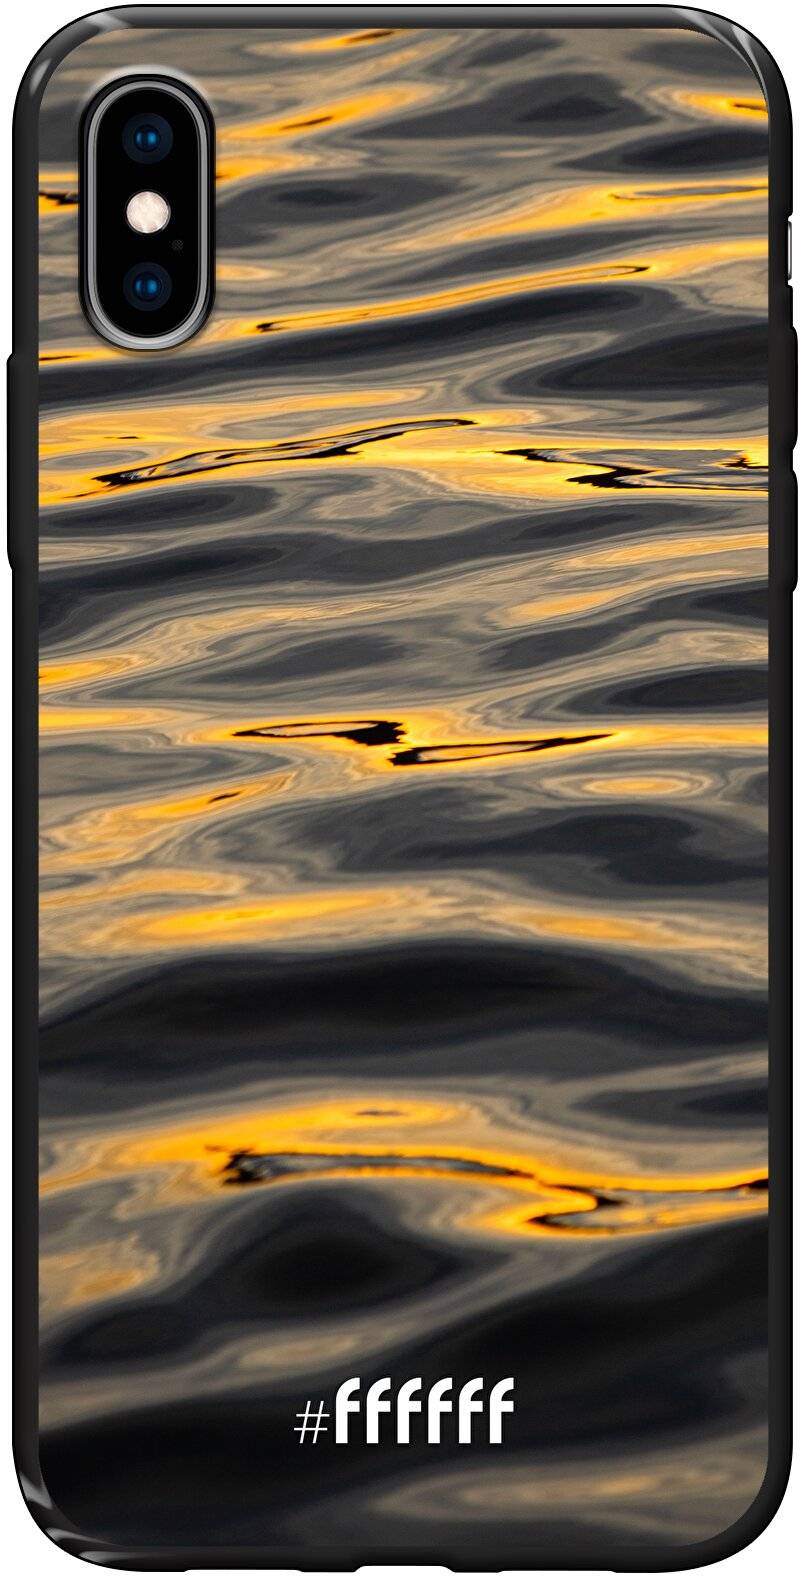 Water Waves iPhone X